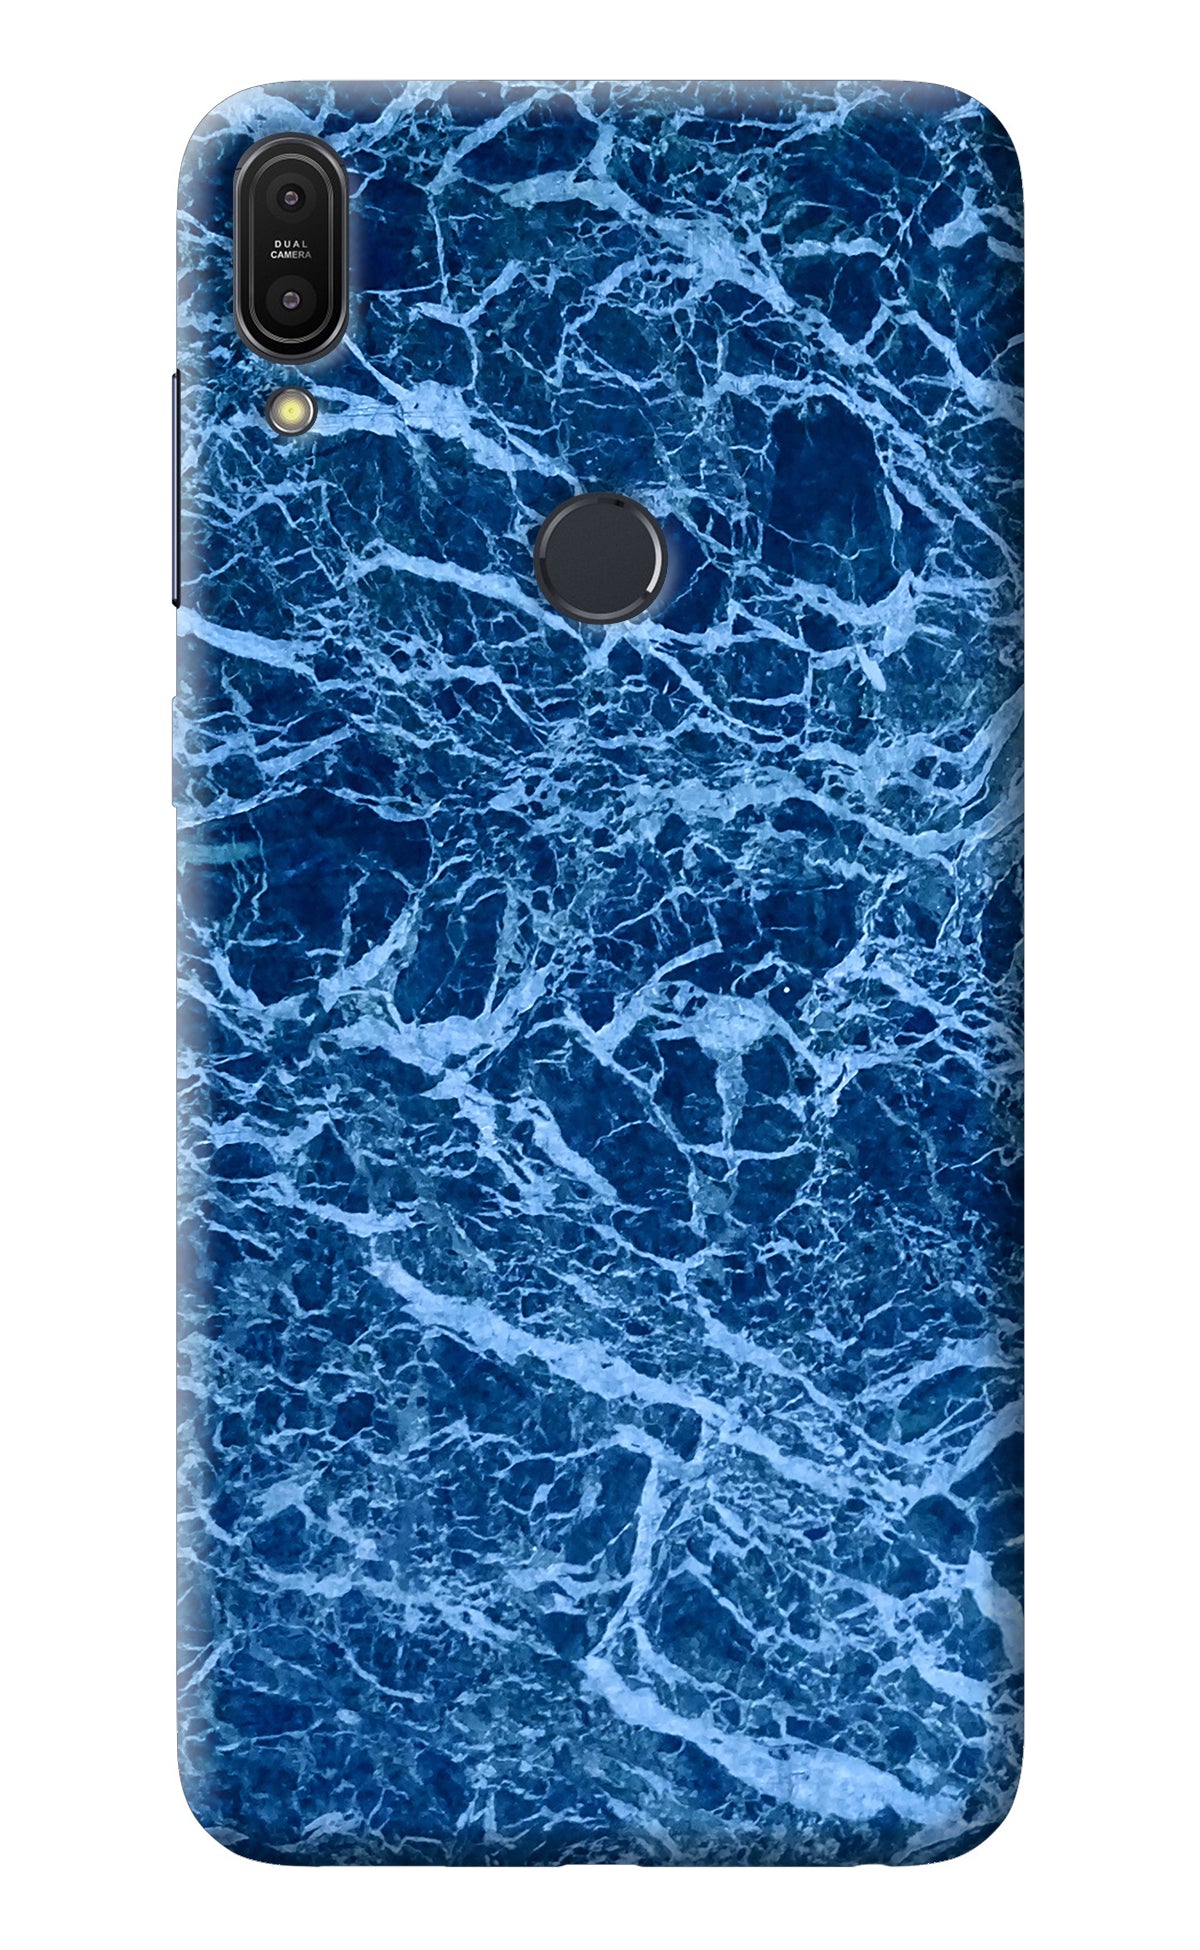 Blue Marble Asus Zenfone Max Pro M1 Back Cover